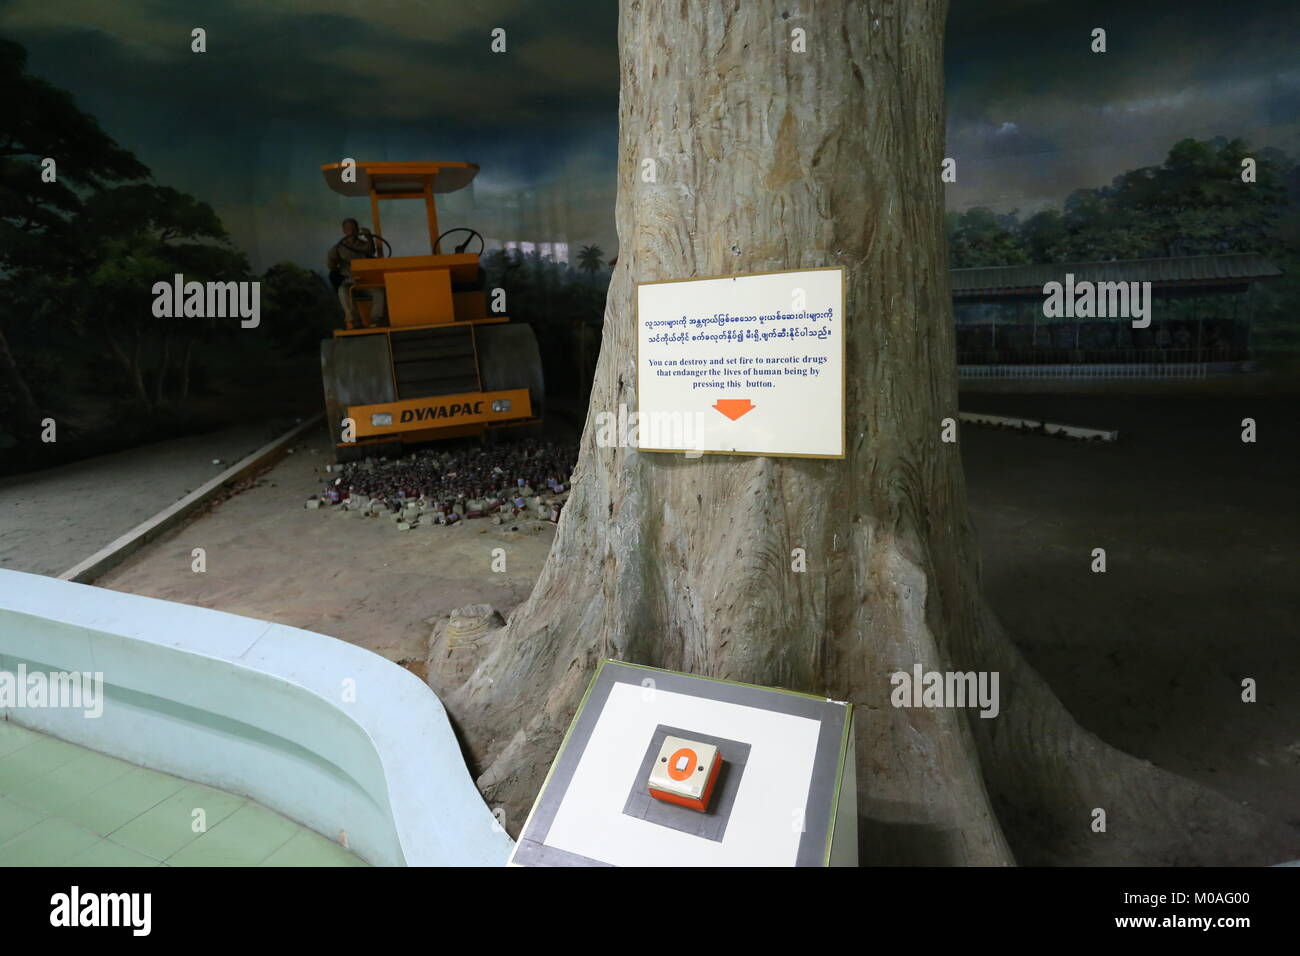 The Drug Elimination Museum in Yangon is filled with displays warning of the dangers and risks of drug addiction. Stock Photo